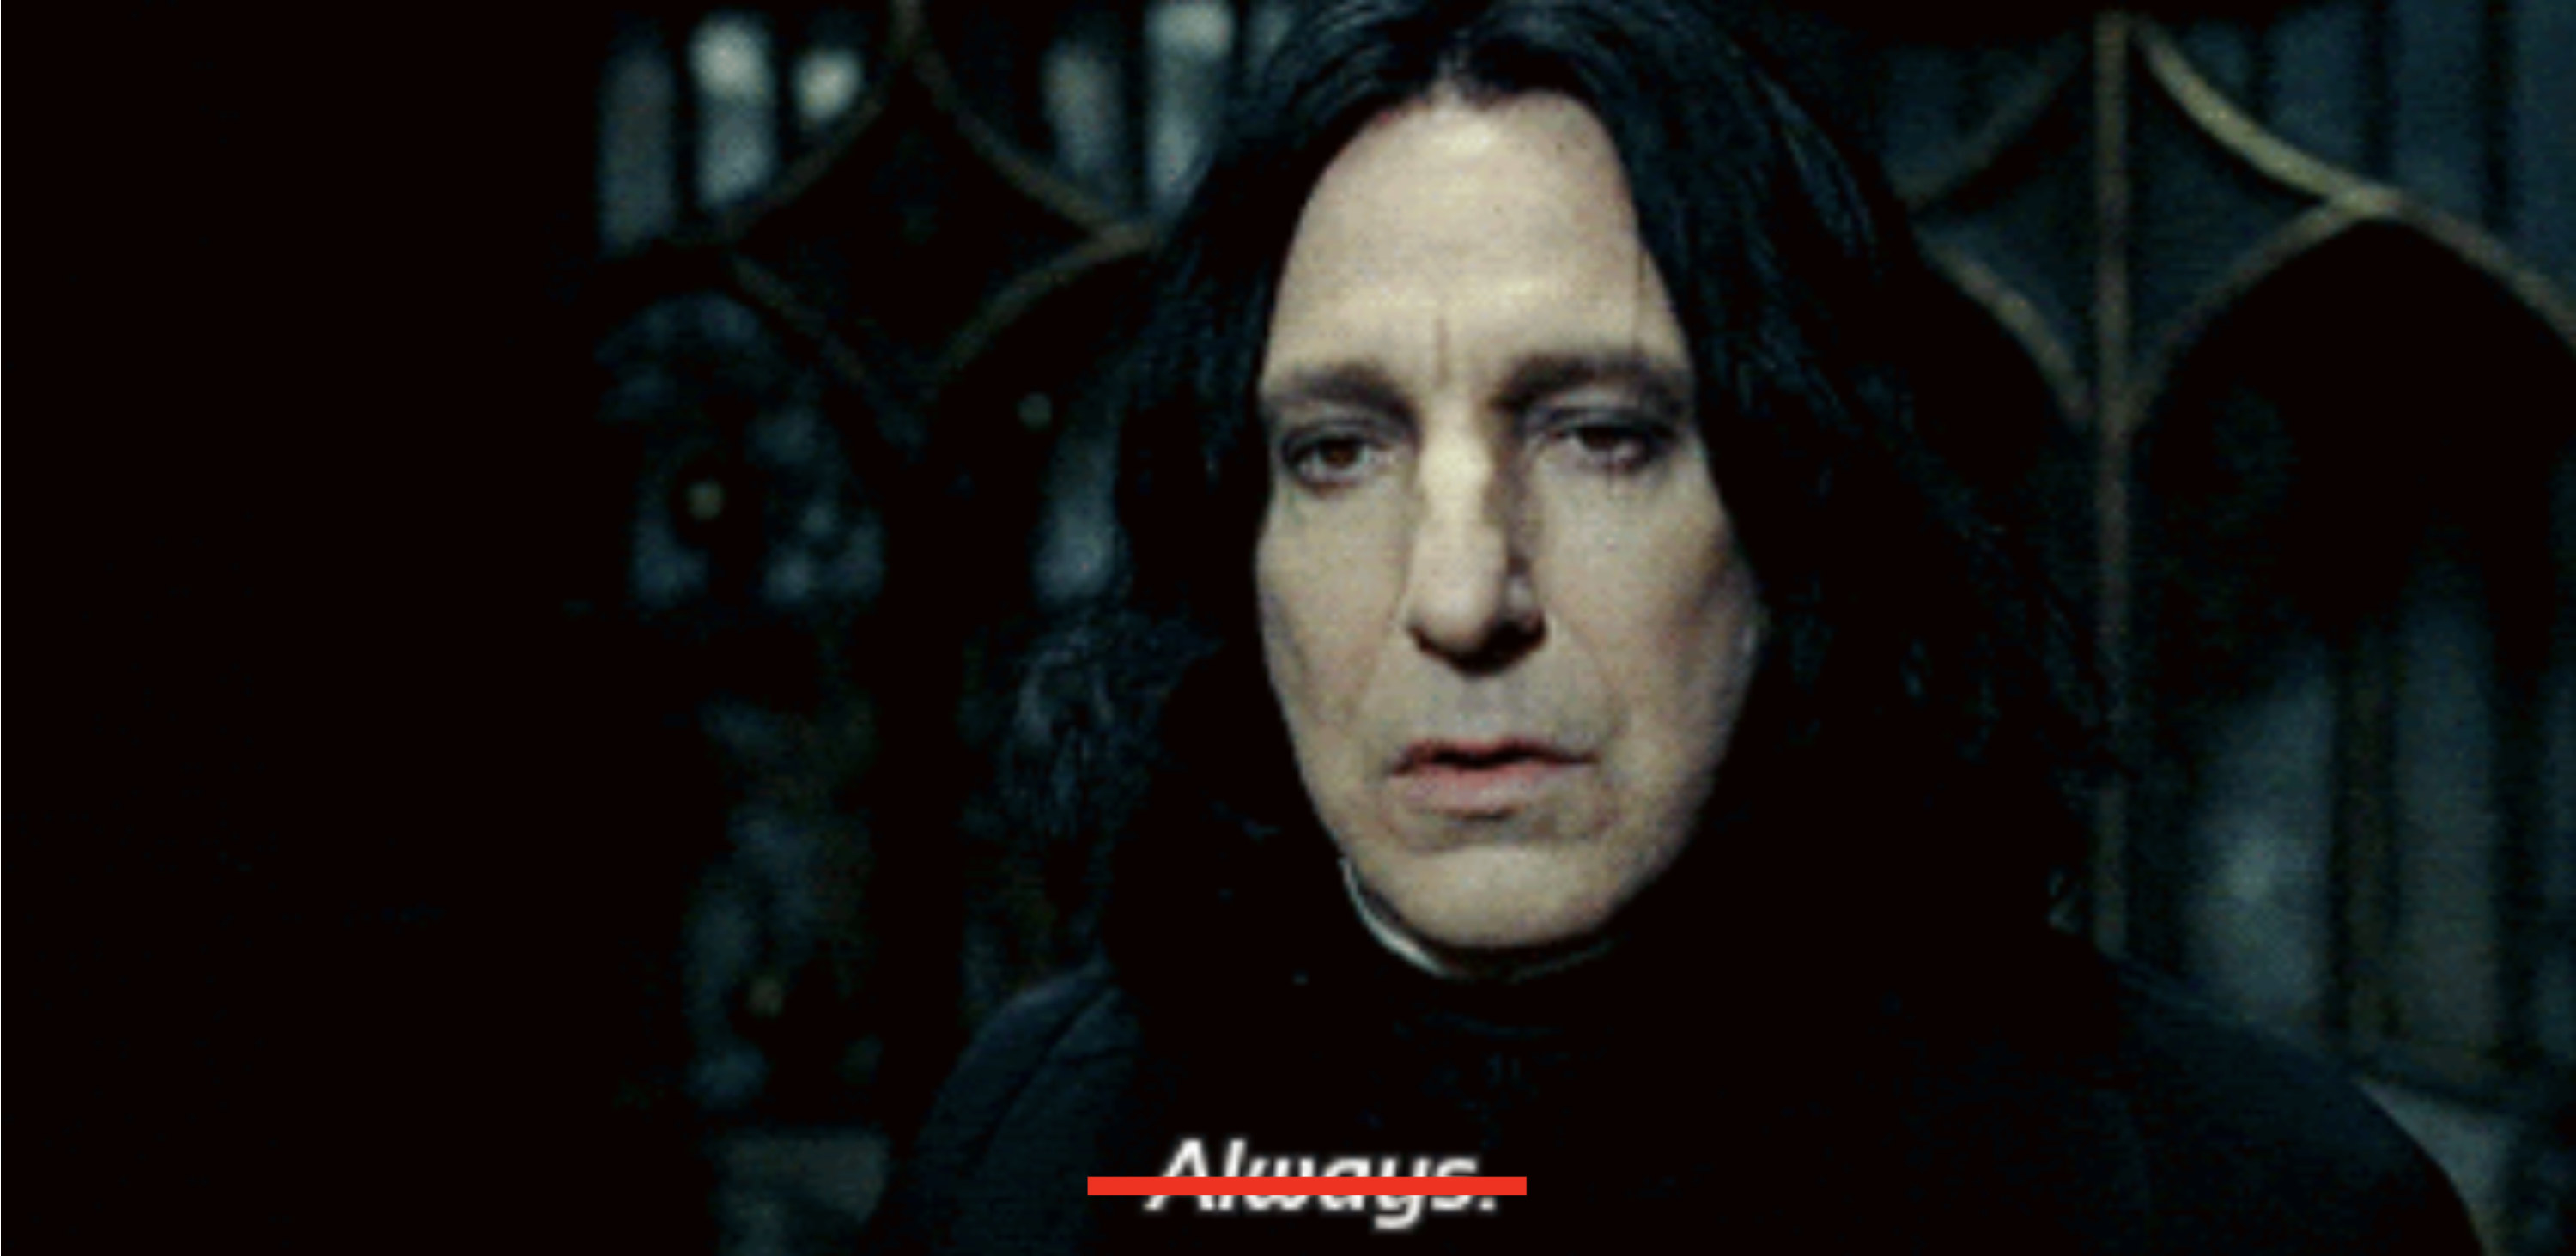 Snape from &quot;Harry Potter and the Deathly Hallows: Part Two&quot; saying: &quot;Always&quot;